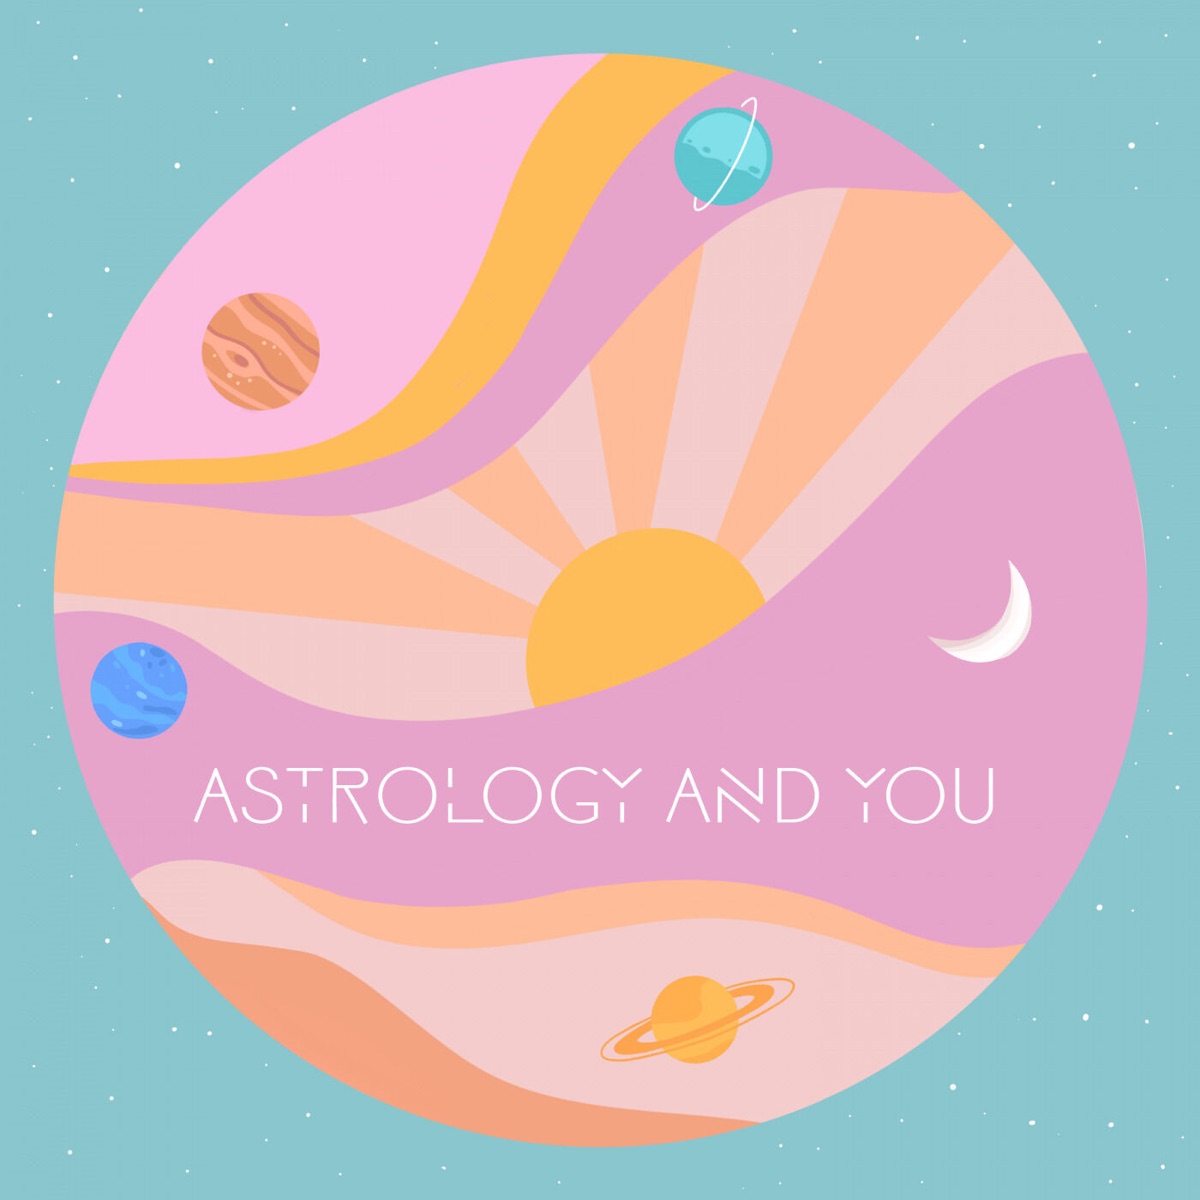 Astrology birth date relationship compatibility Know About